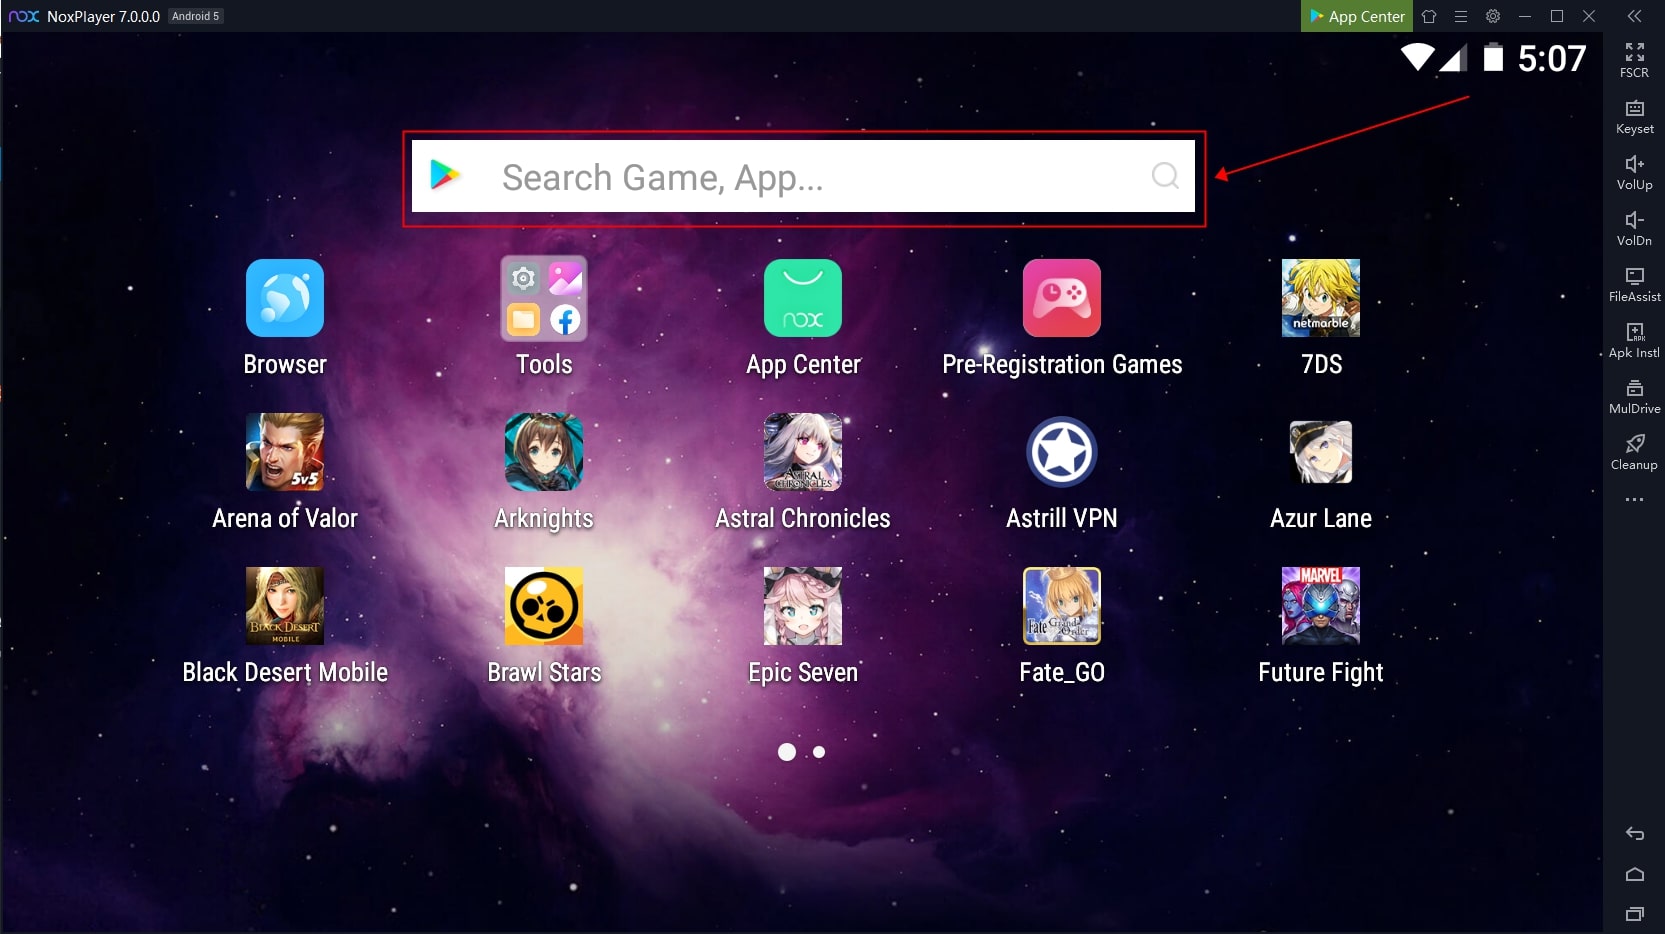 NoxPlayer (Recomended for Gamer) lightweight android emulator